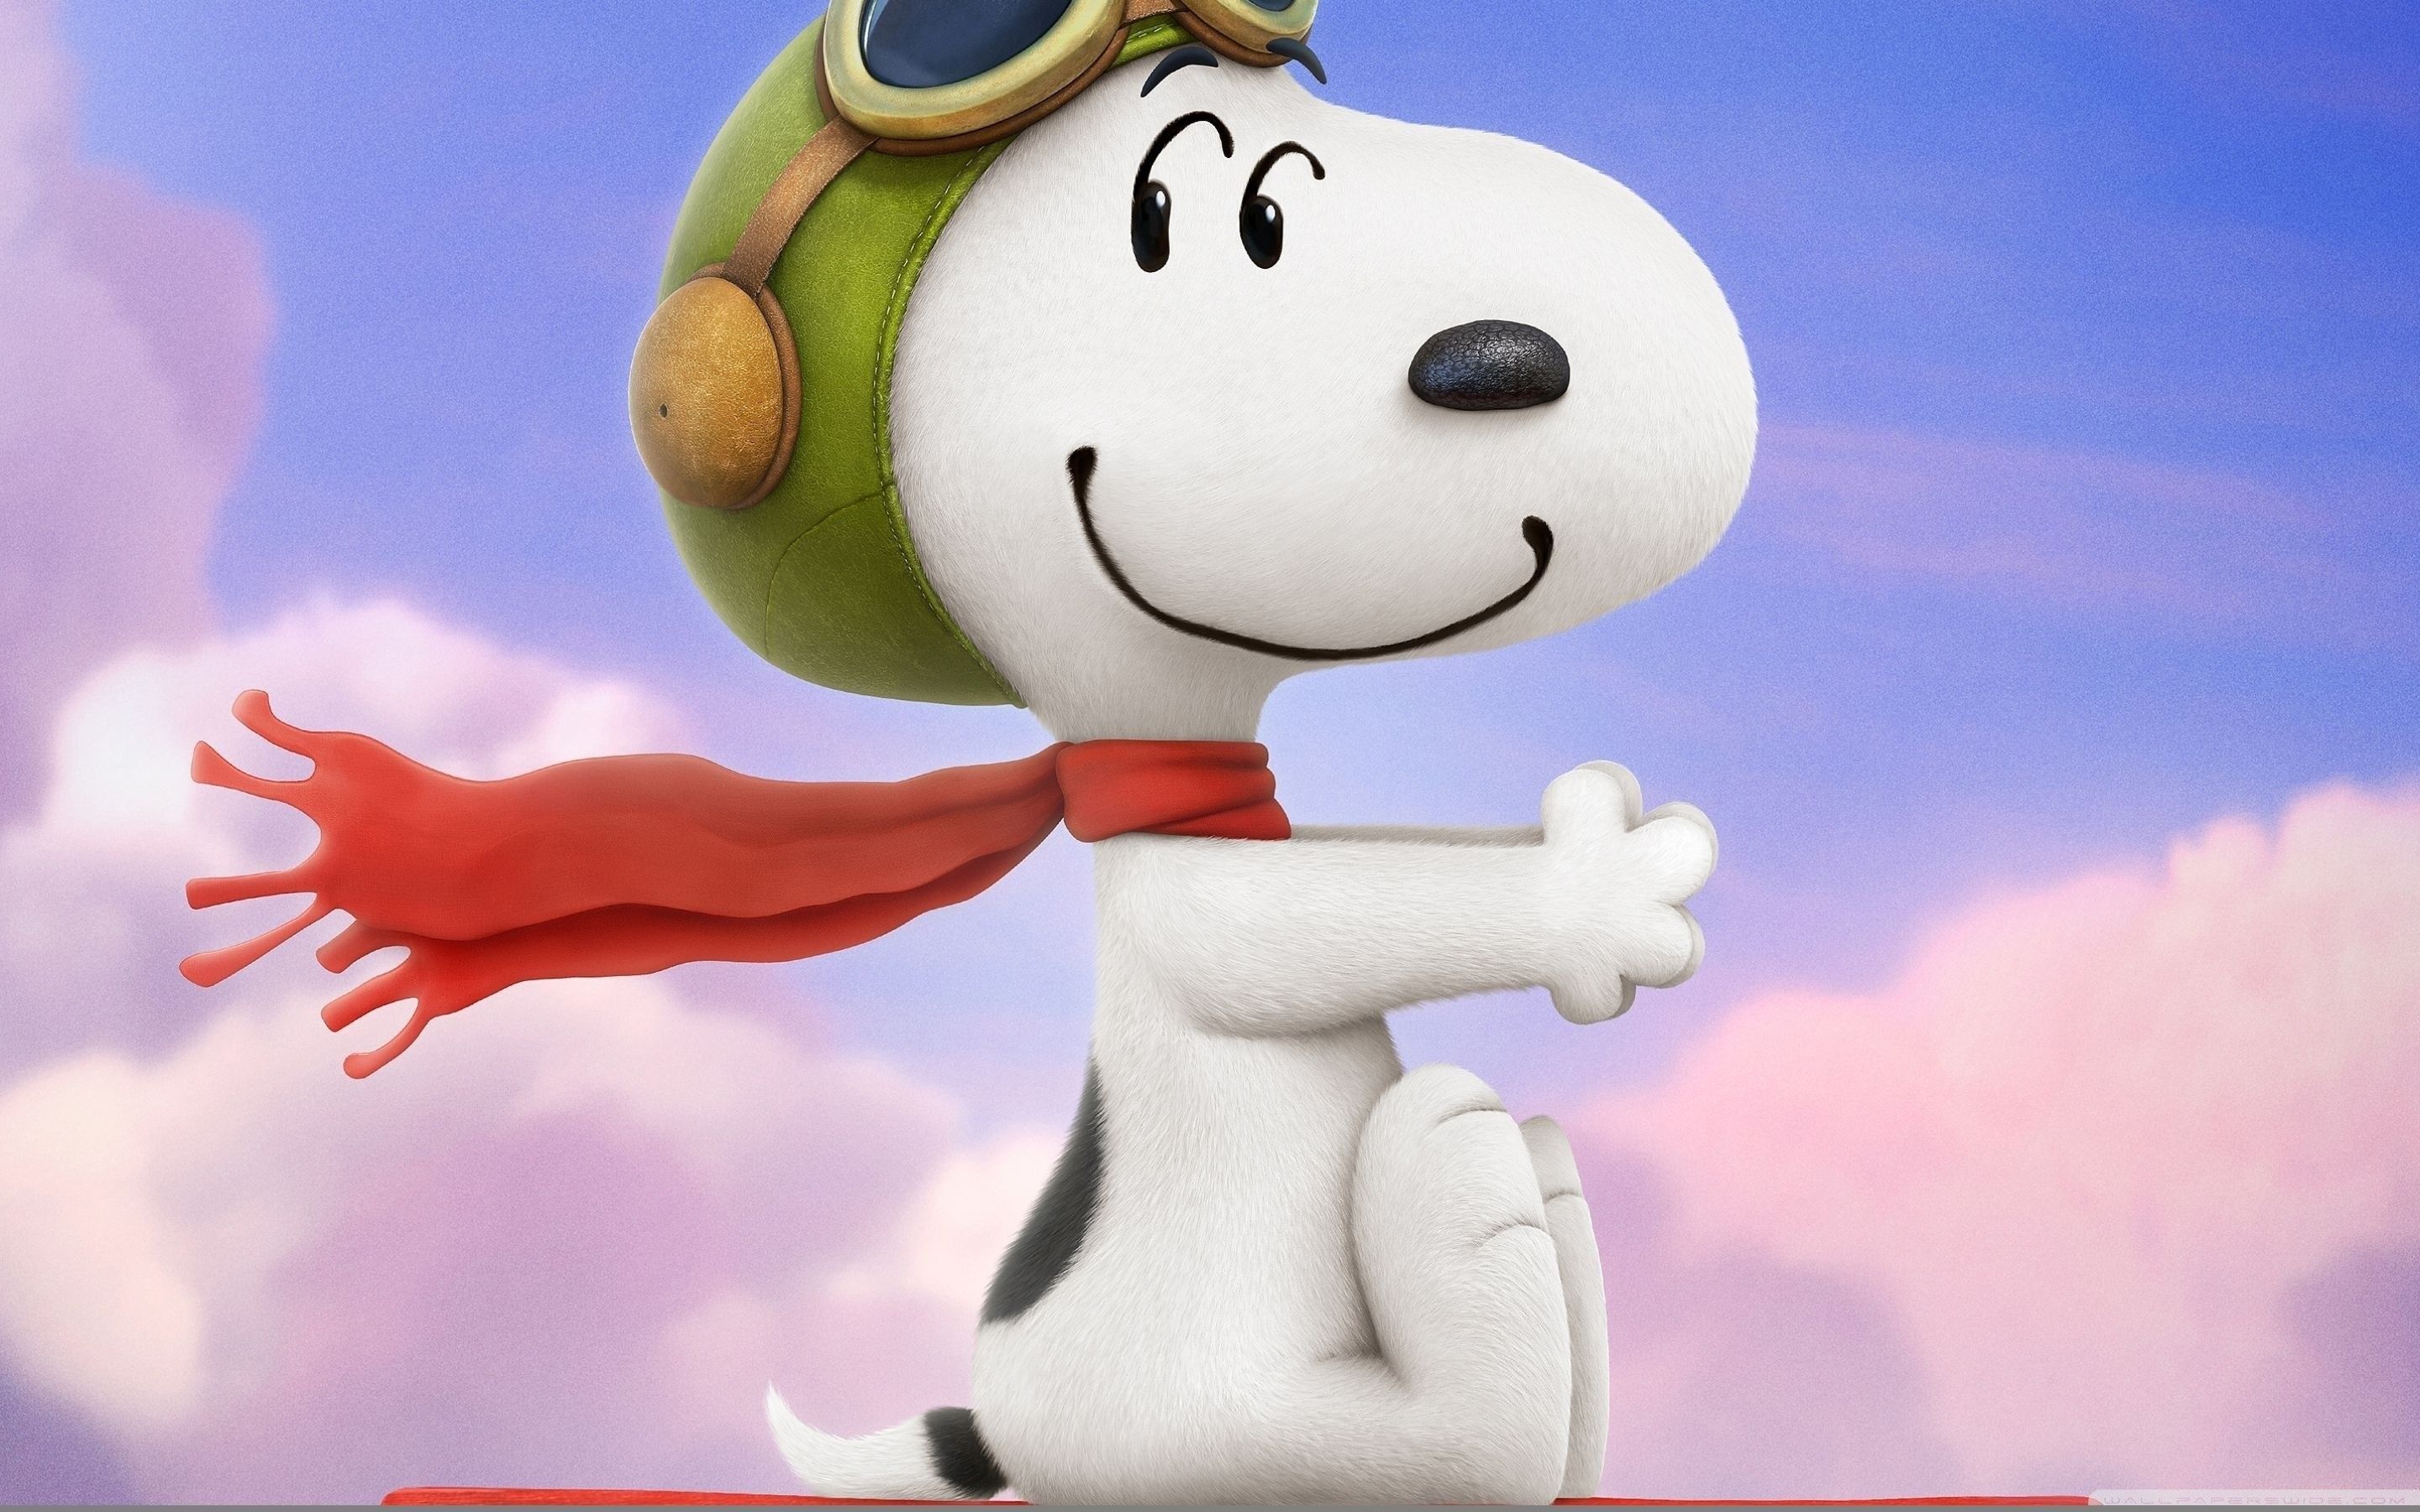 The Pilot Snoopy Wallpaper ID: 1728